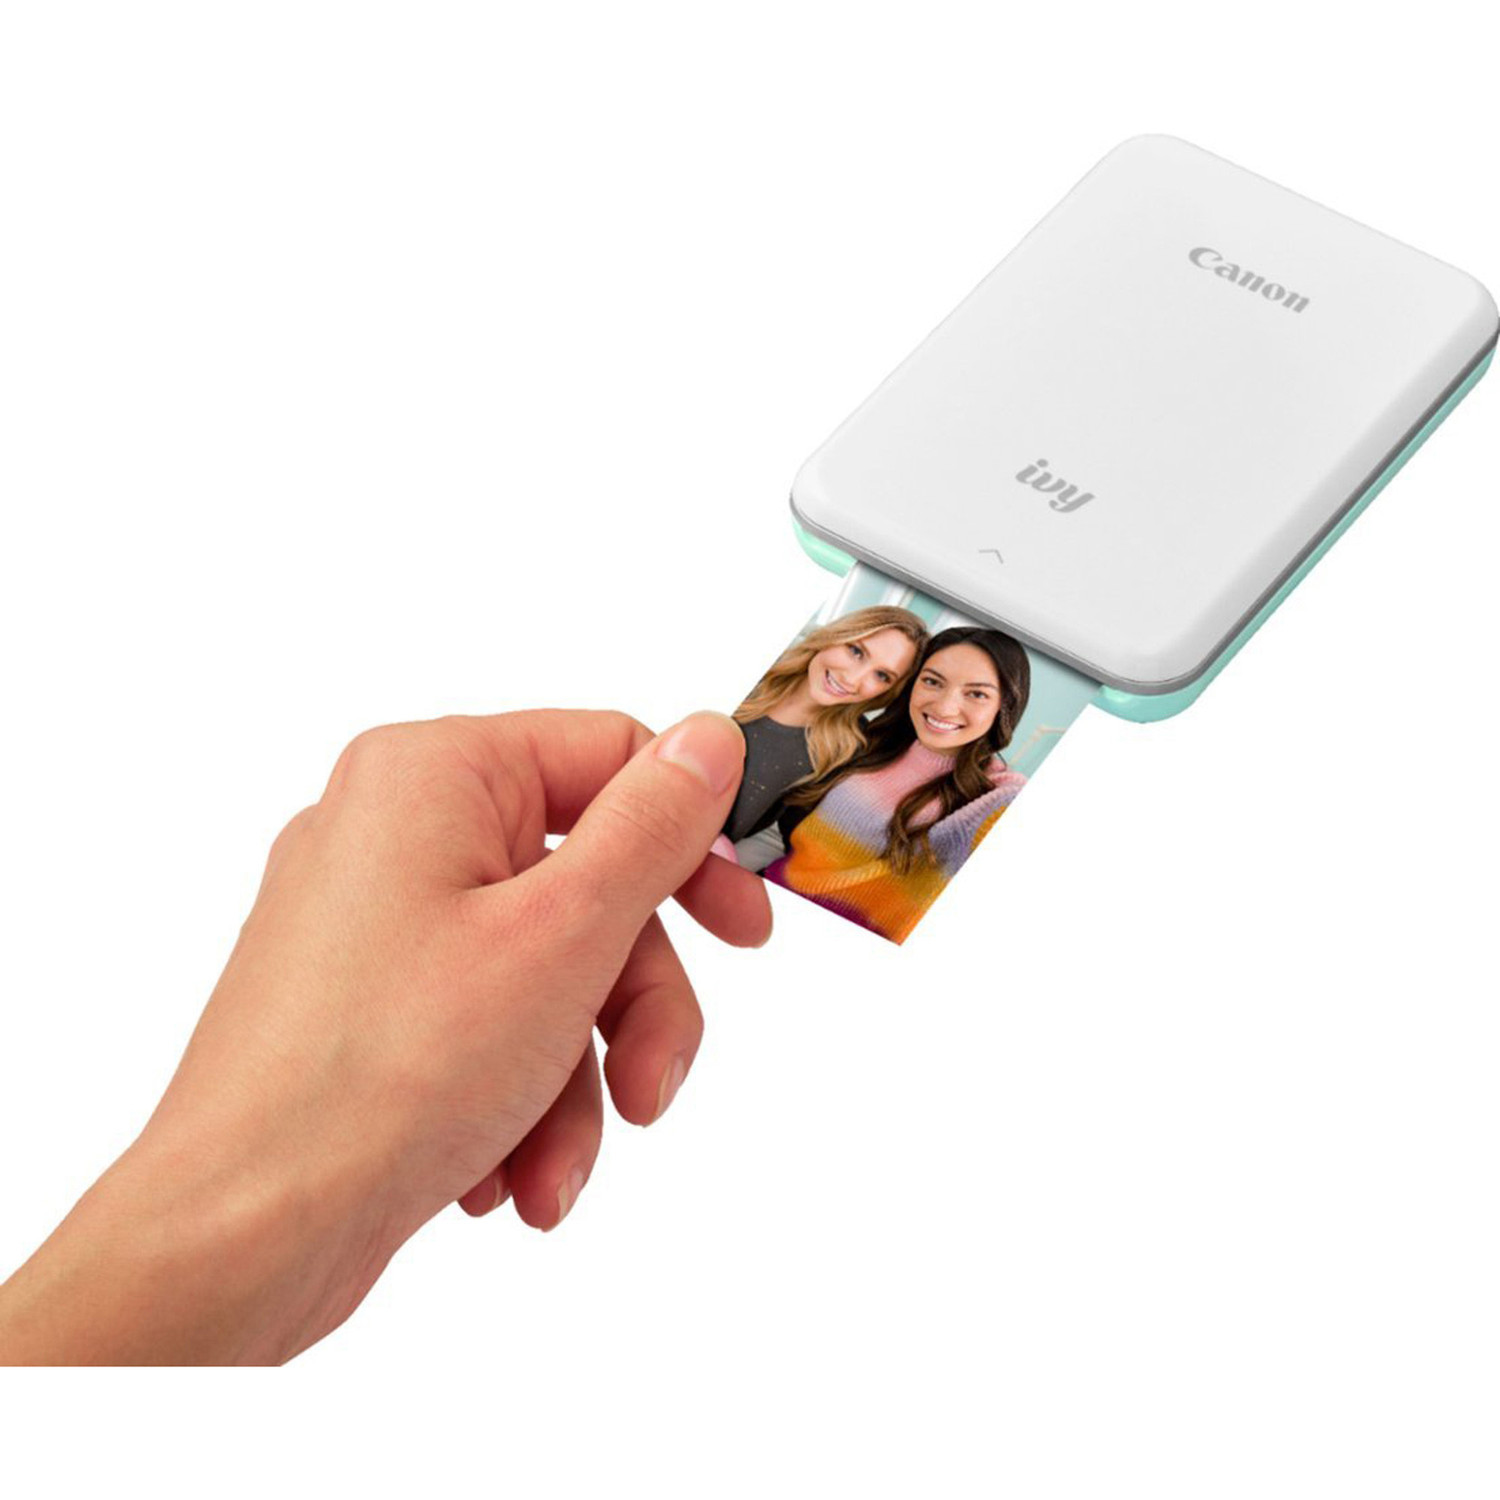 Canon Ivy Mini Photo Printer for Smartphones (Mint Green) & Zink™ Sticky  Back Photo Paper Pack (100 Sheets) & Zink Photo Paper Pack, 50 Sheets